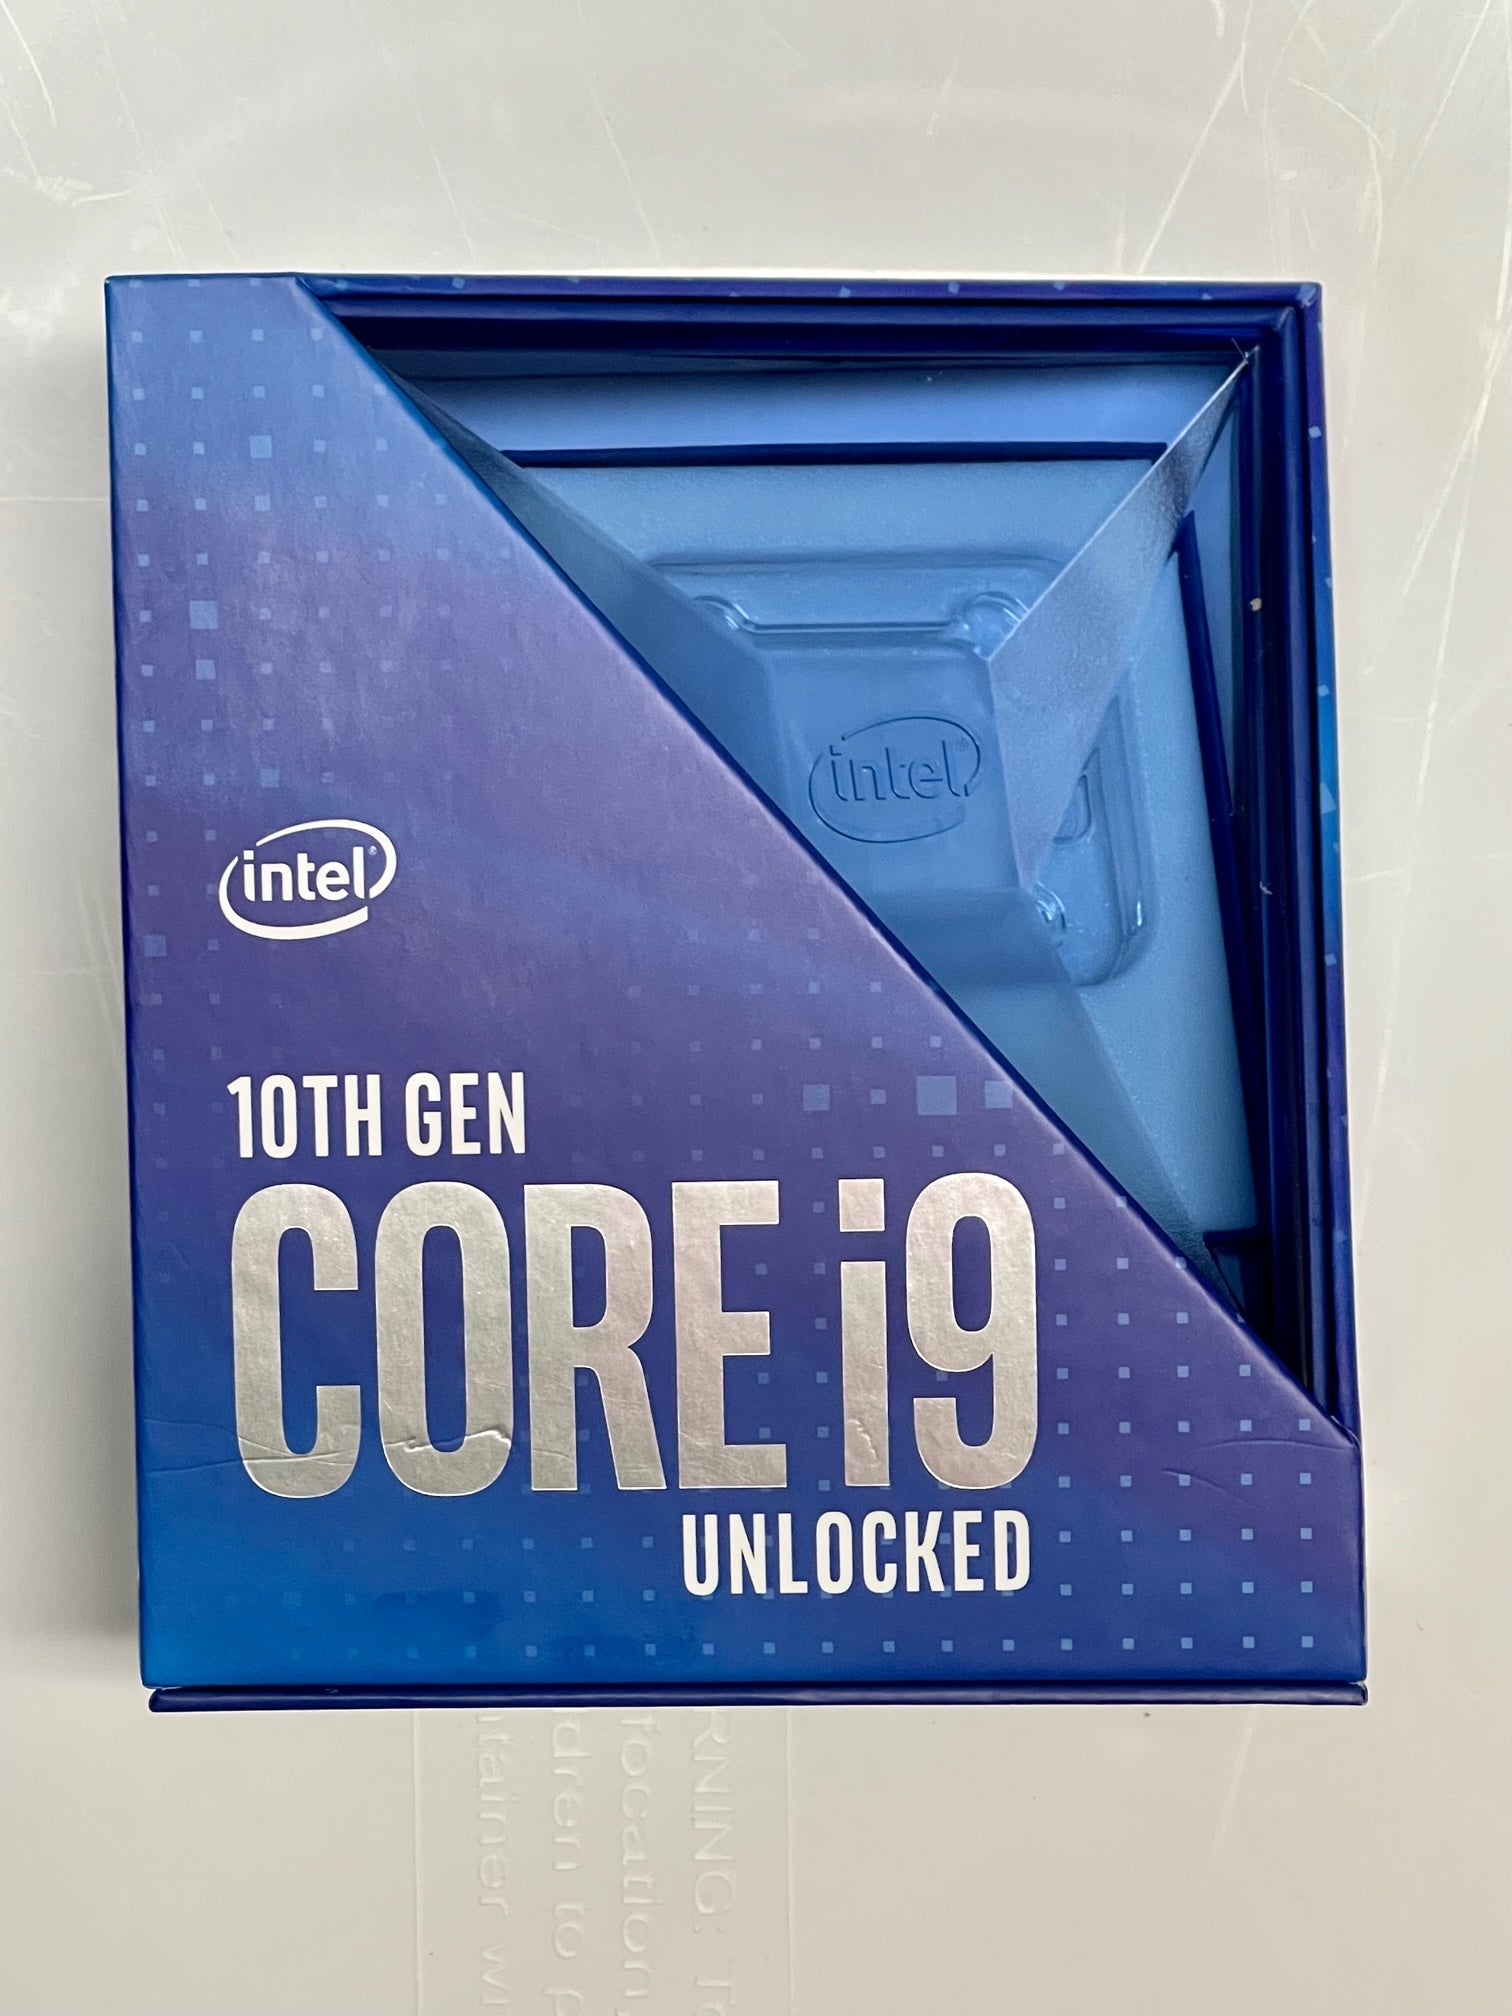 My friend bought a i9-10900k and it came in a unusual box that i